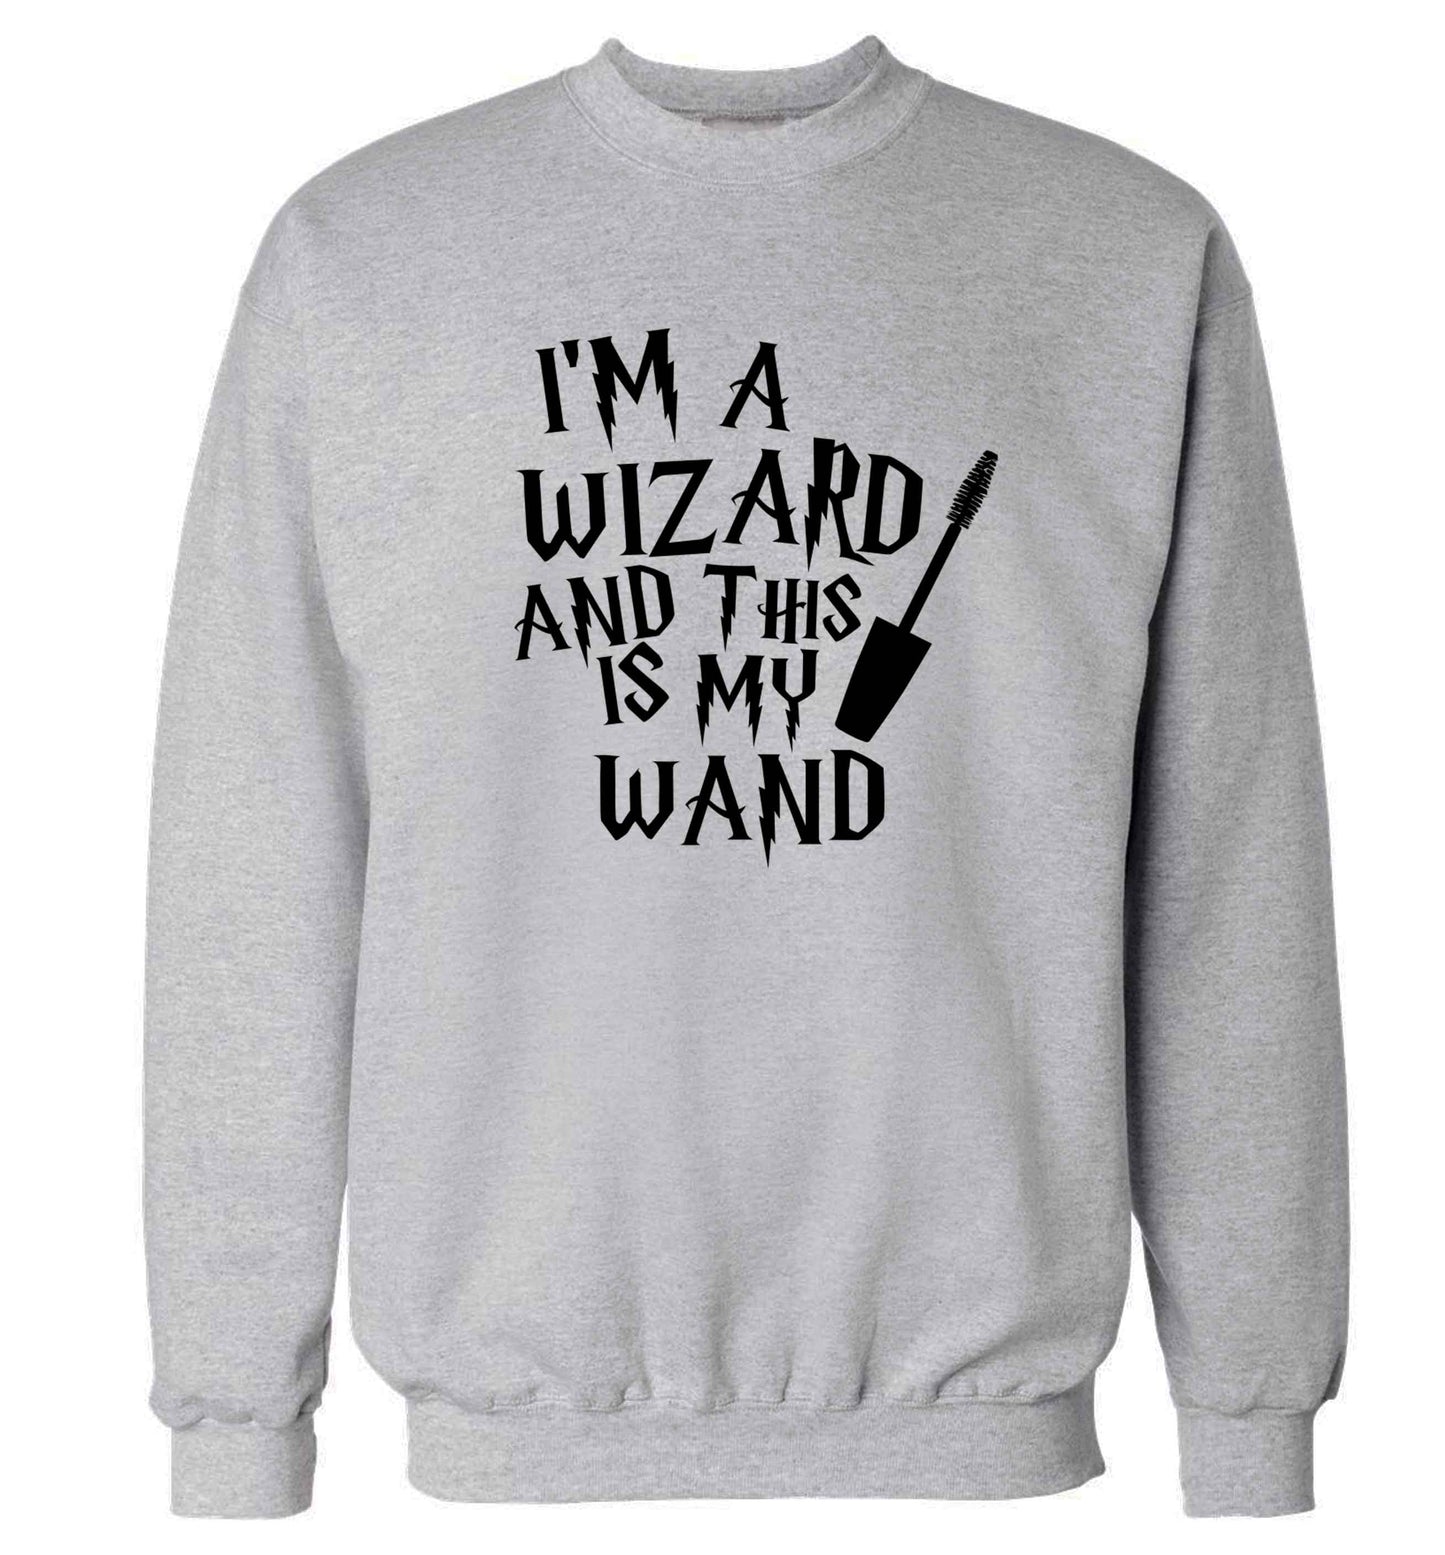 I'm a wizard and this is my wand Adult's unisex grey Sweater 2XL